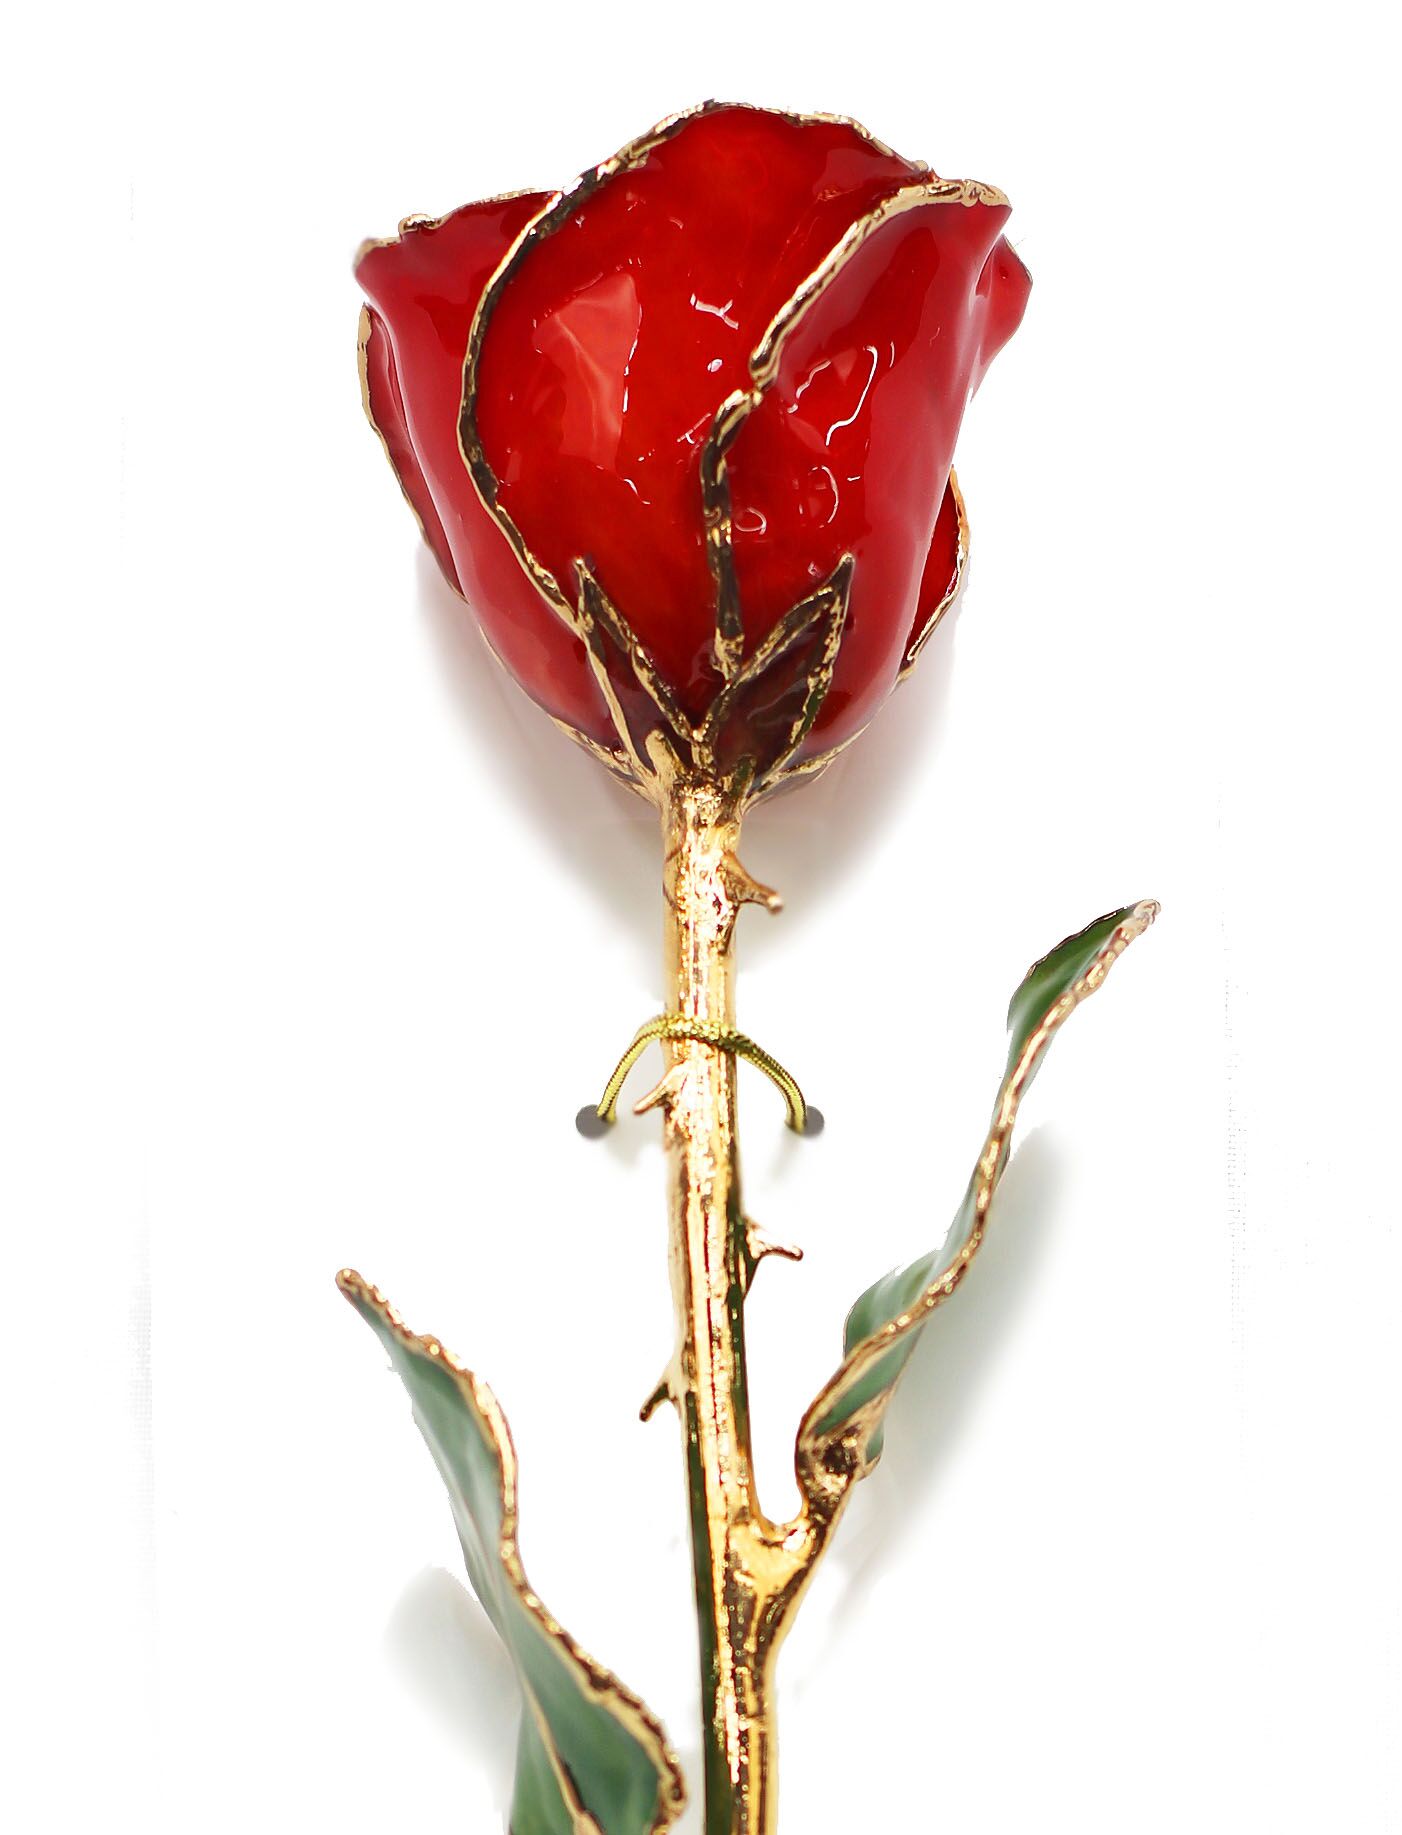 Red Rose Dipped in Gold Red Rose Dipped in Gold This product contains a real rose that is hand picked. With the timeless beauty of nature, each rose is carefully selected, sized and preserved at the peak of its beauty. A fine delicate layer of lacquer has been applied to preserved its natural appearance, then electroformed and completed with 24k gold.
DELIVERY: Every order is hand-delivered direct to the recipient. These items will be delivered by us locally, or a qualified retail local florist.